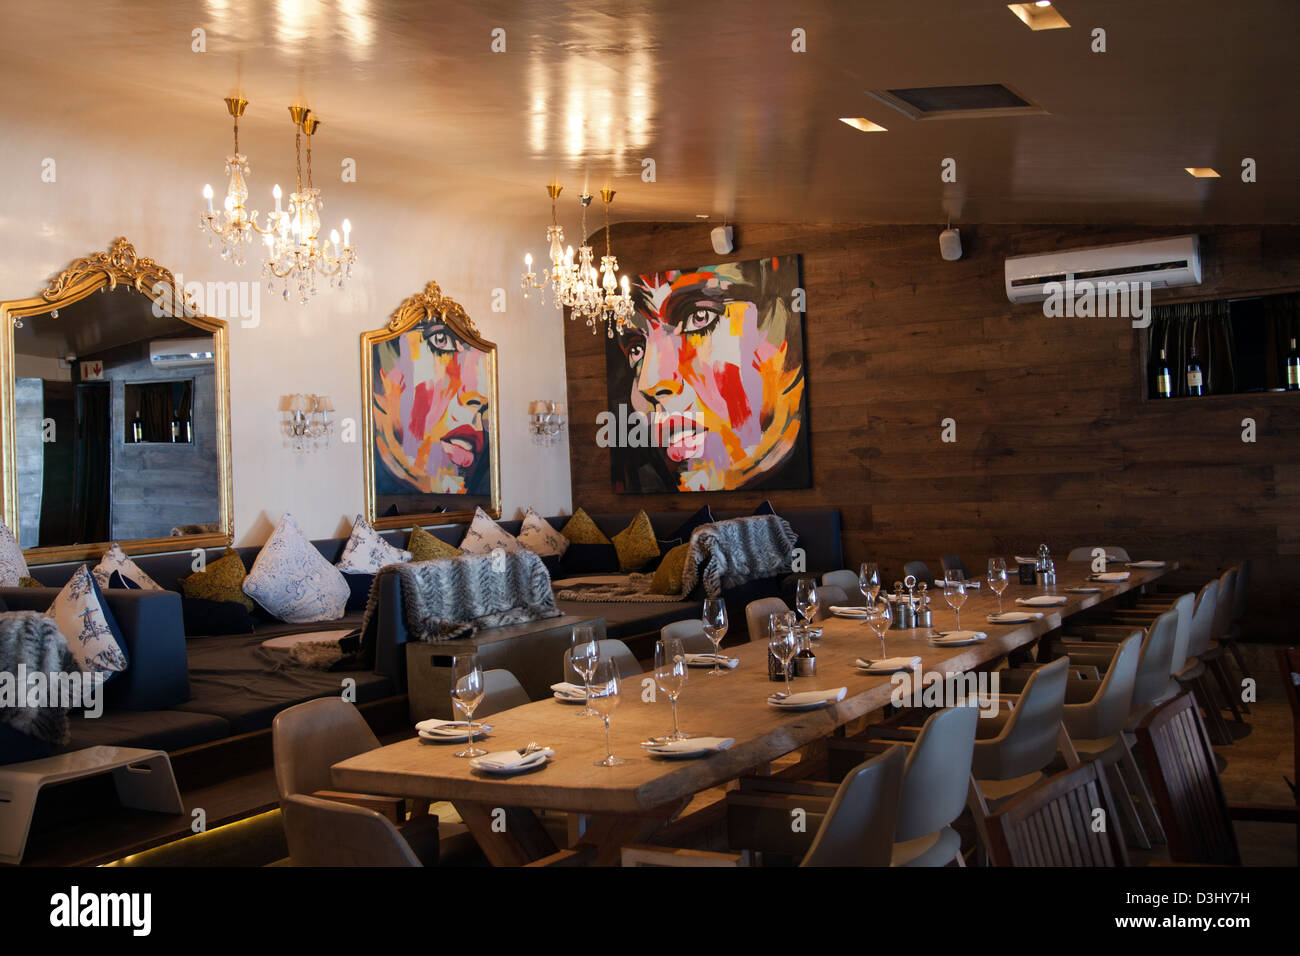 The Bungalow Restaurant in Camps Bay, Cape Town - South Africa Stock Photo  - Alamy